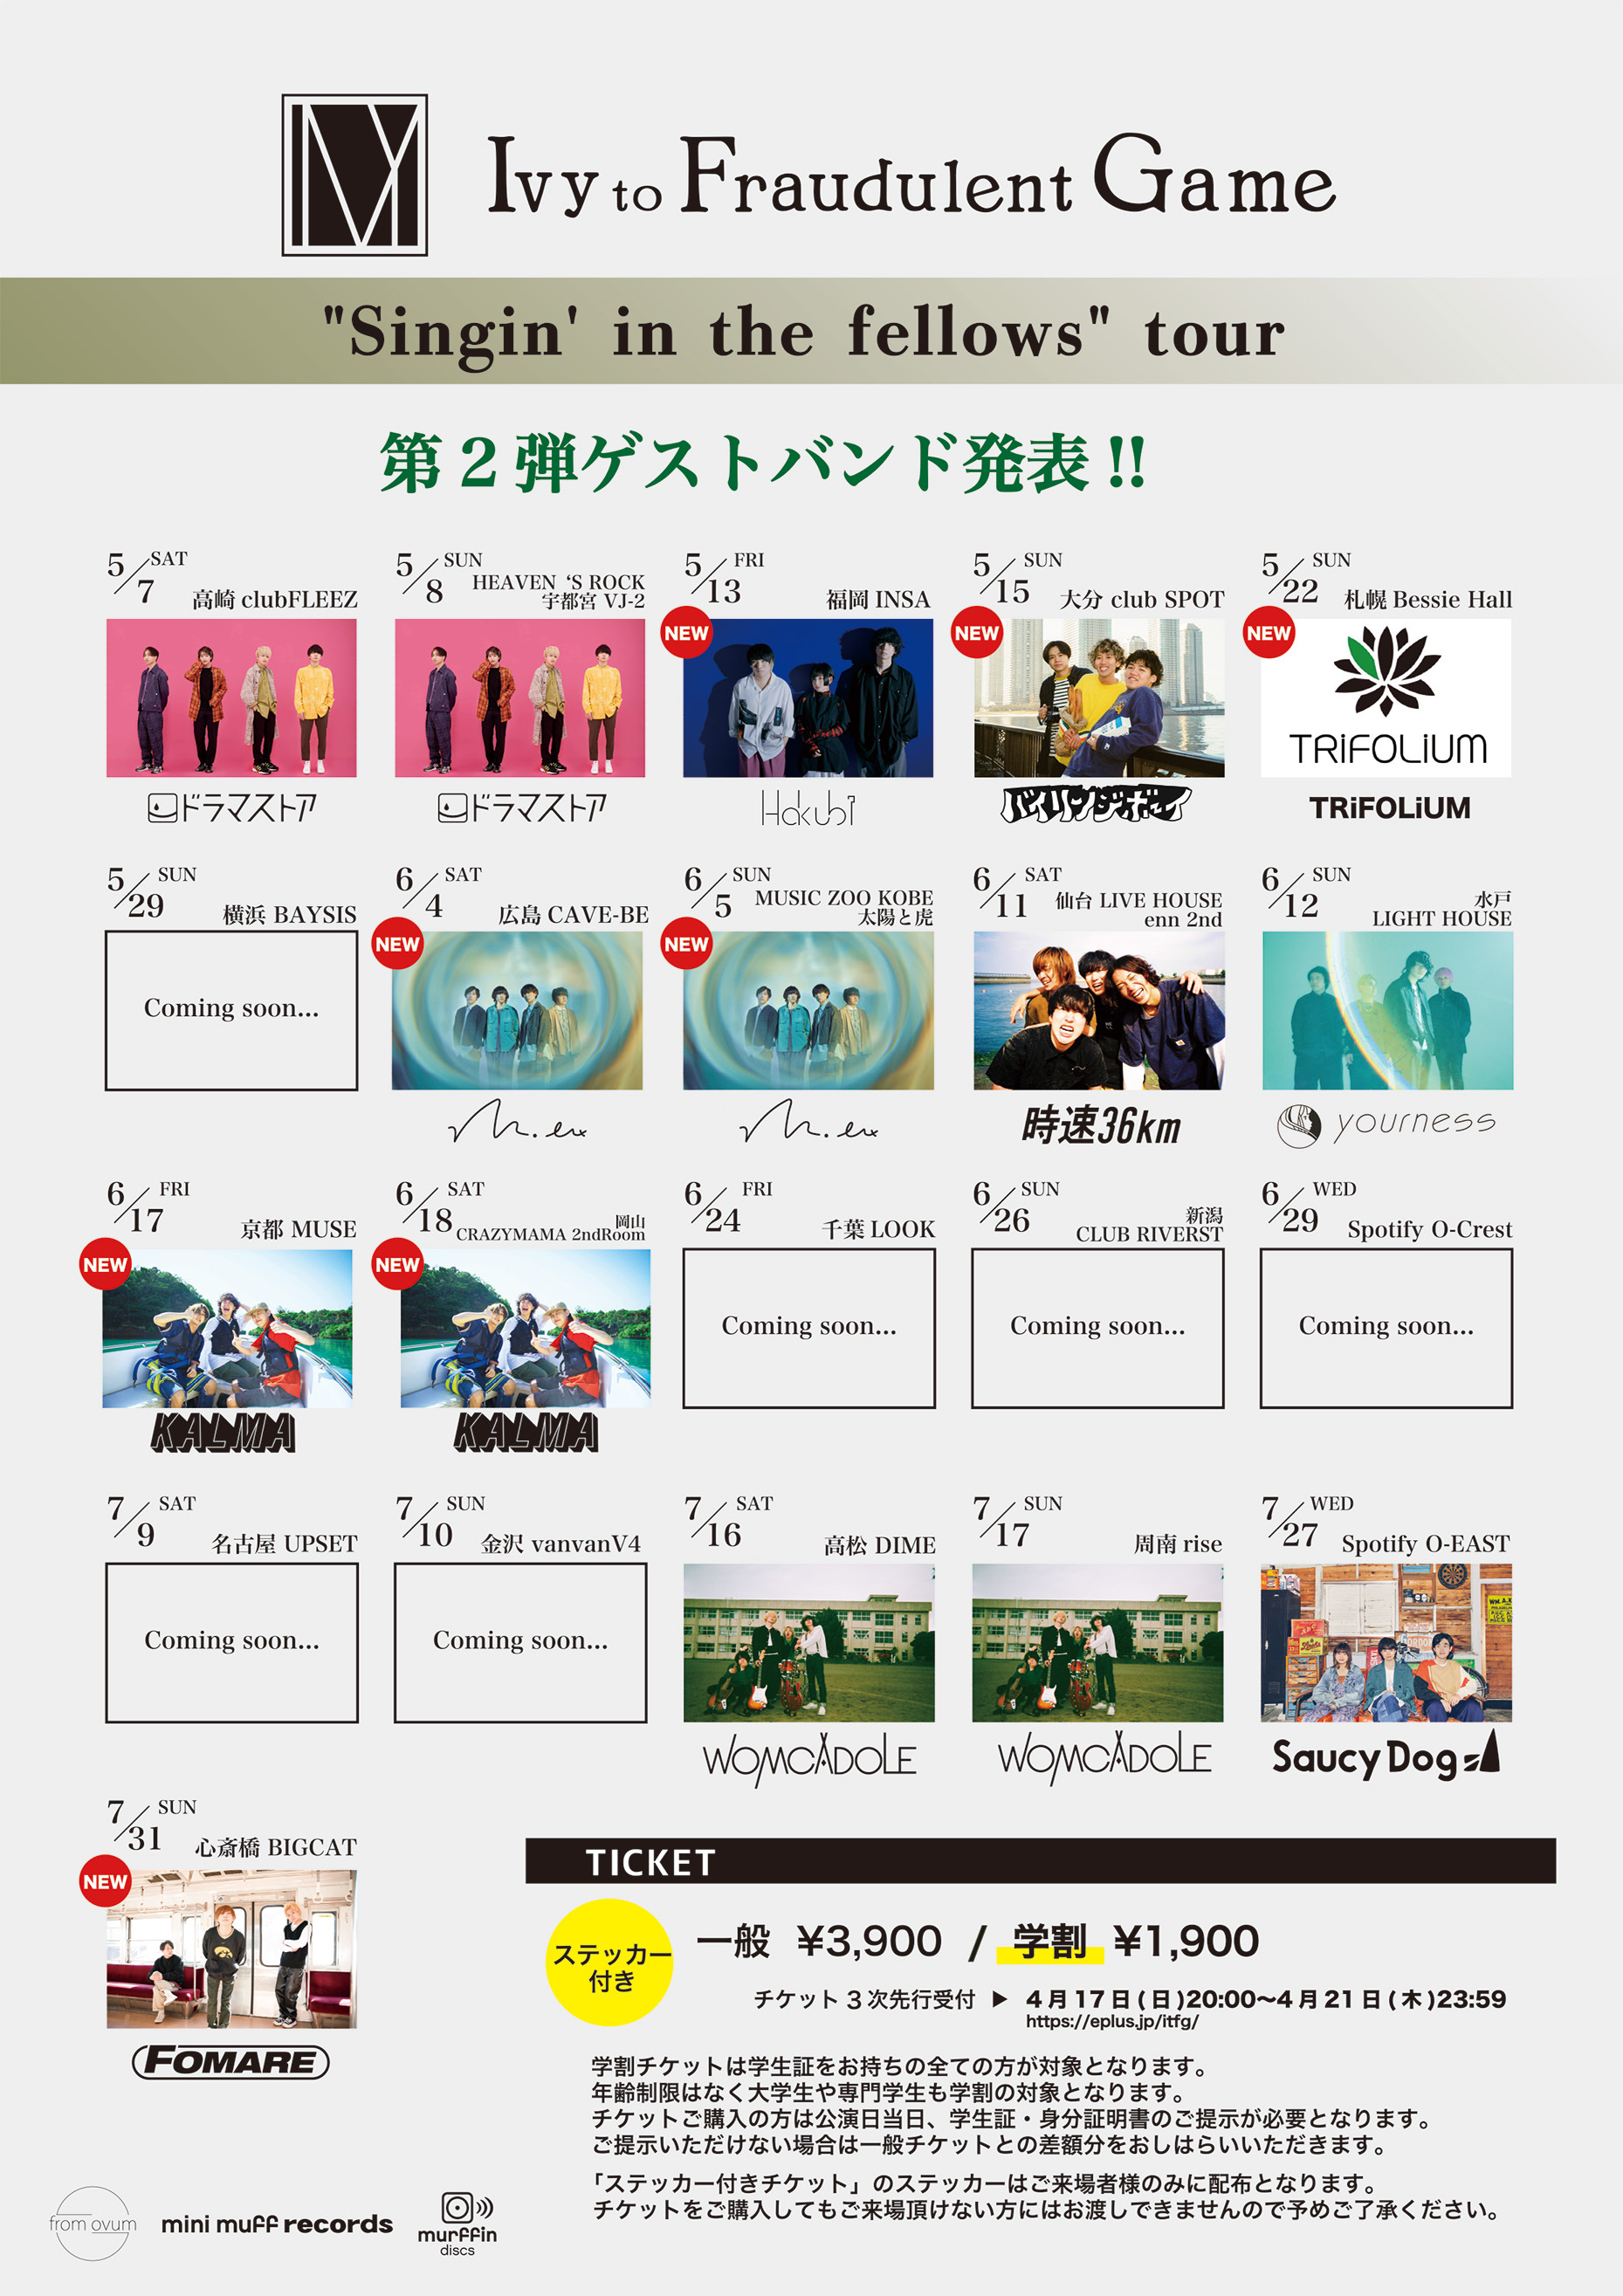 Ivy to Fraudulent Game Pre.「”Singin' in the fellowstour 」出演決定｜Saucy Dog  Official Site